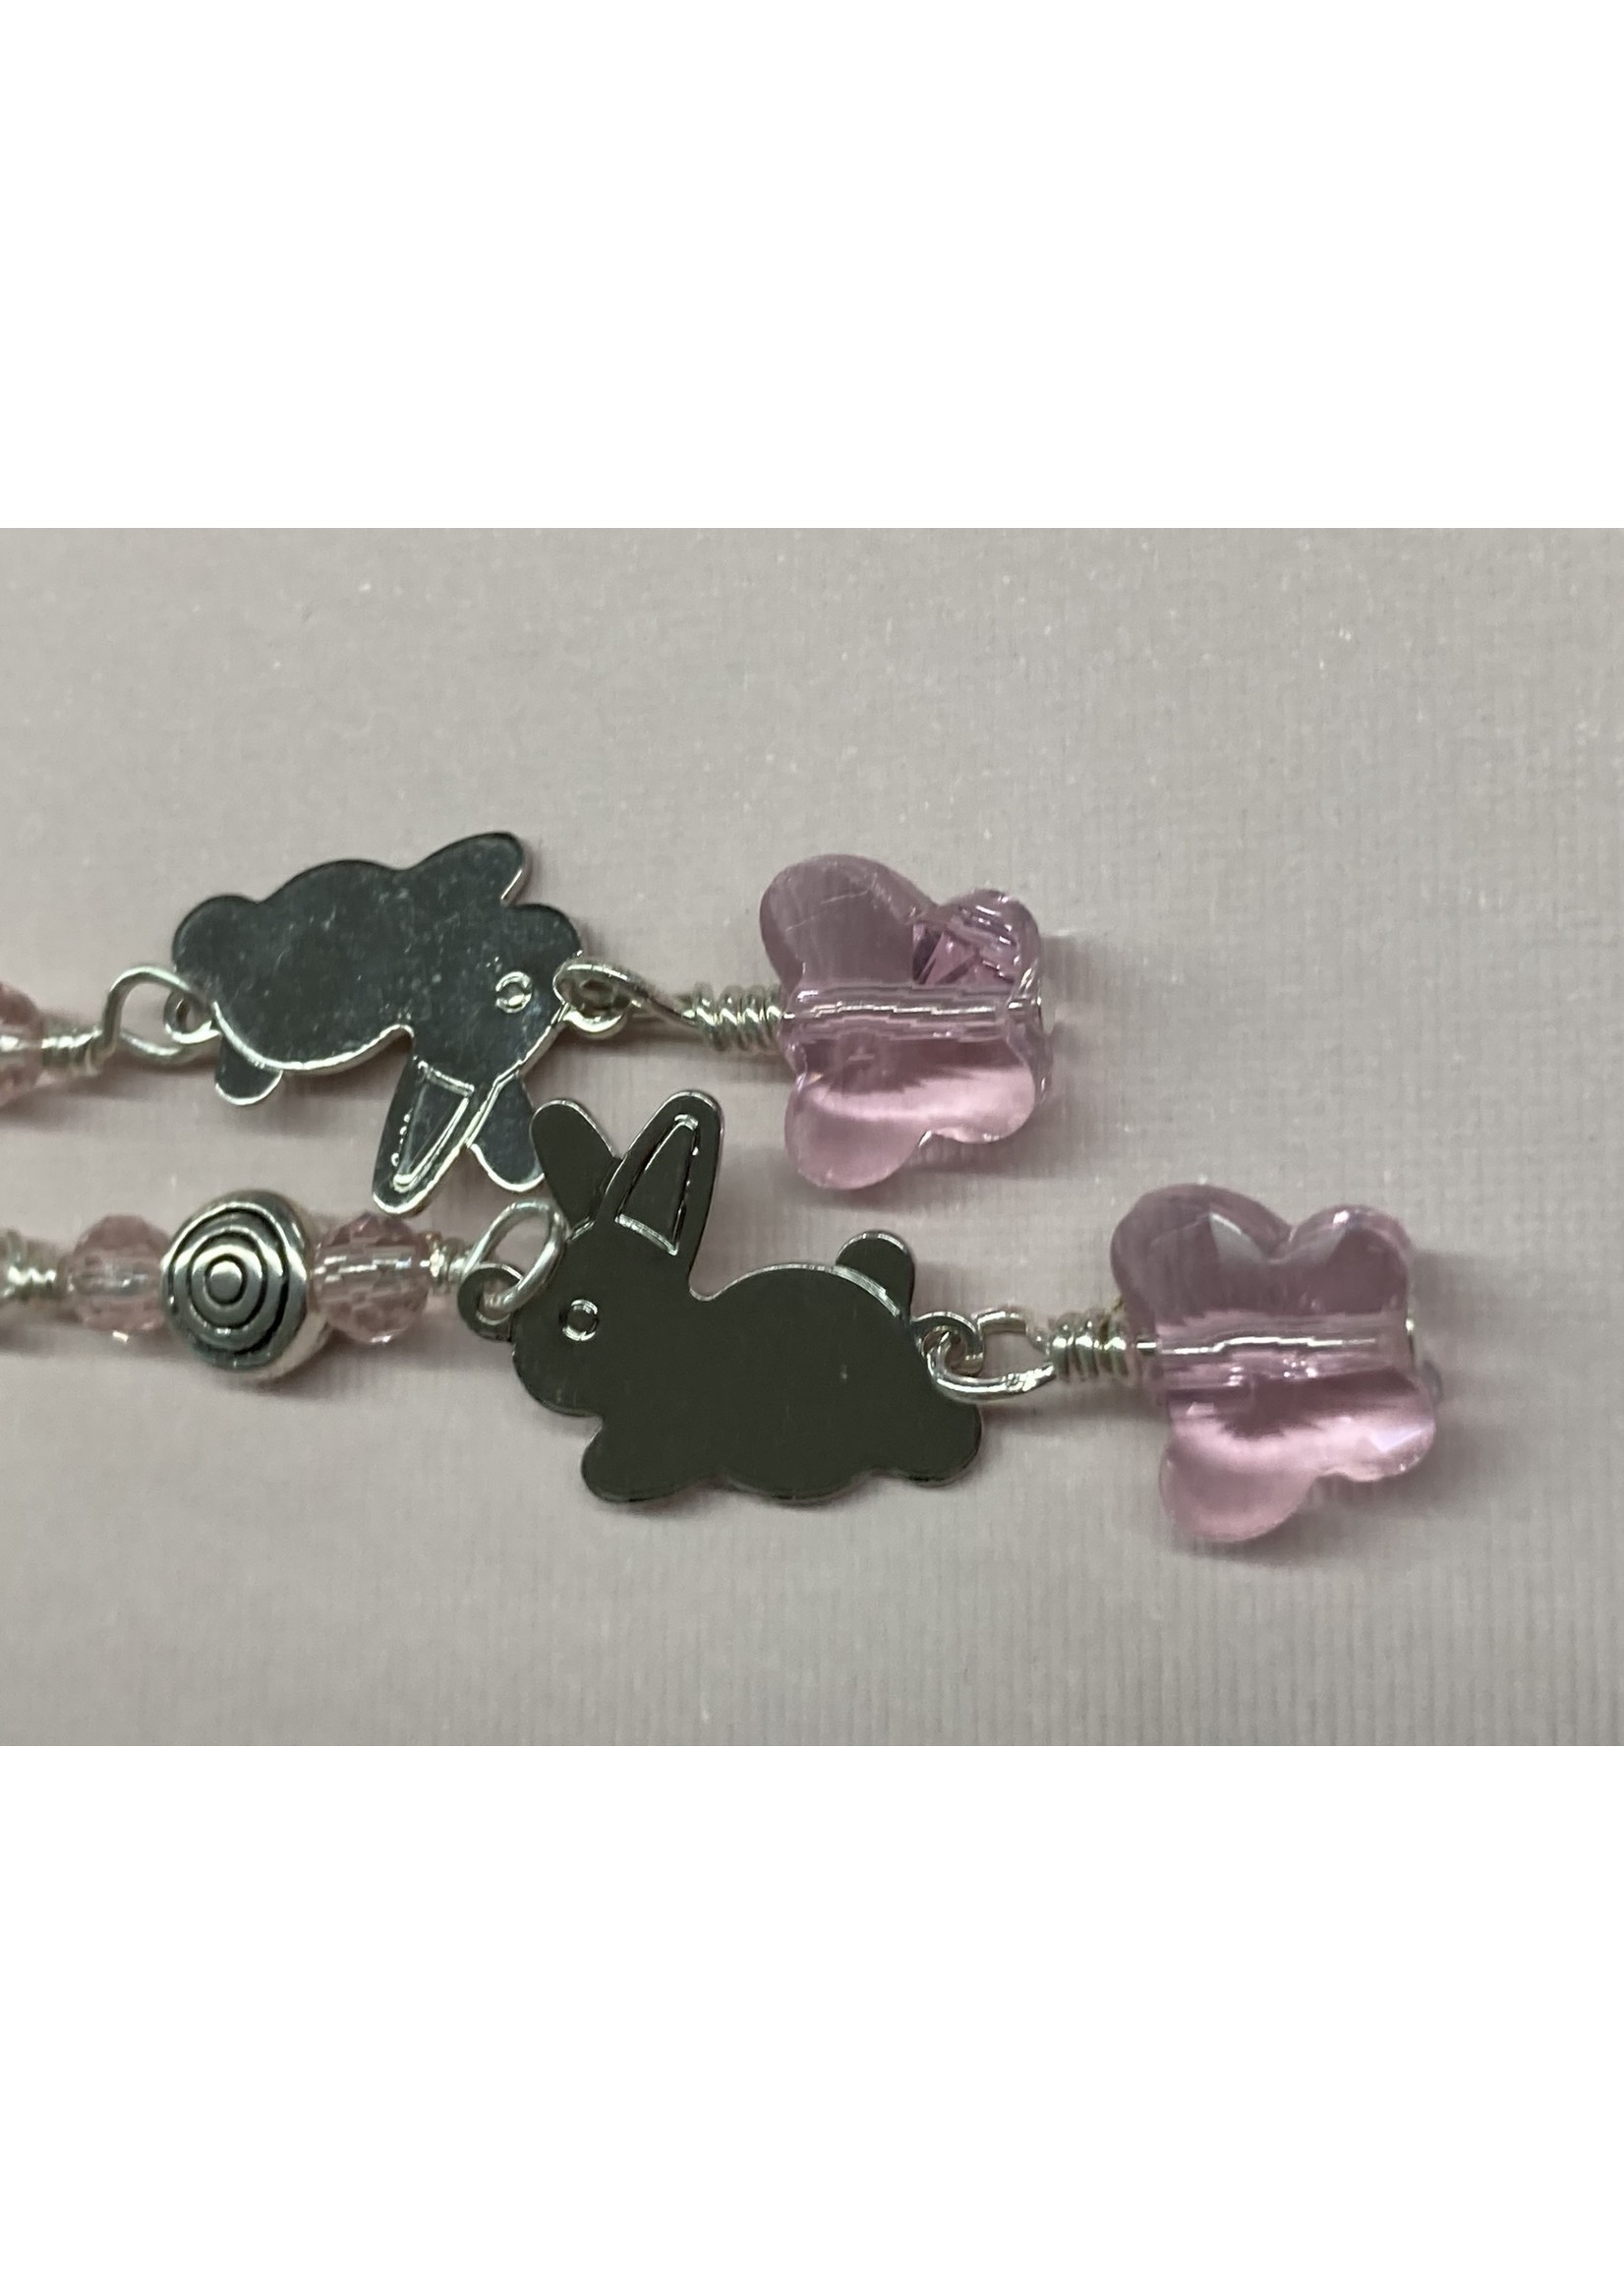 Our Twisted Dahlia E010 Silver Bunny Charms with Pink Crystal Butterflies, Silver Swirl Beads, and Pink Crystal Earrings